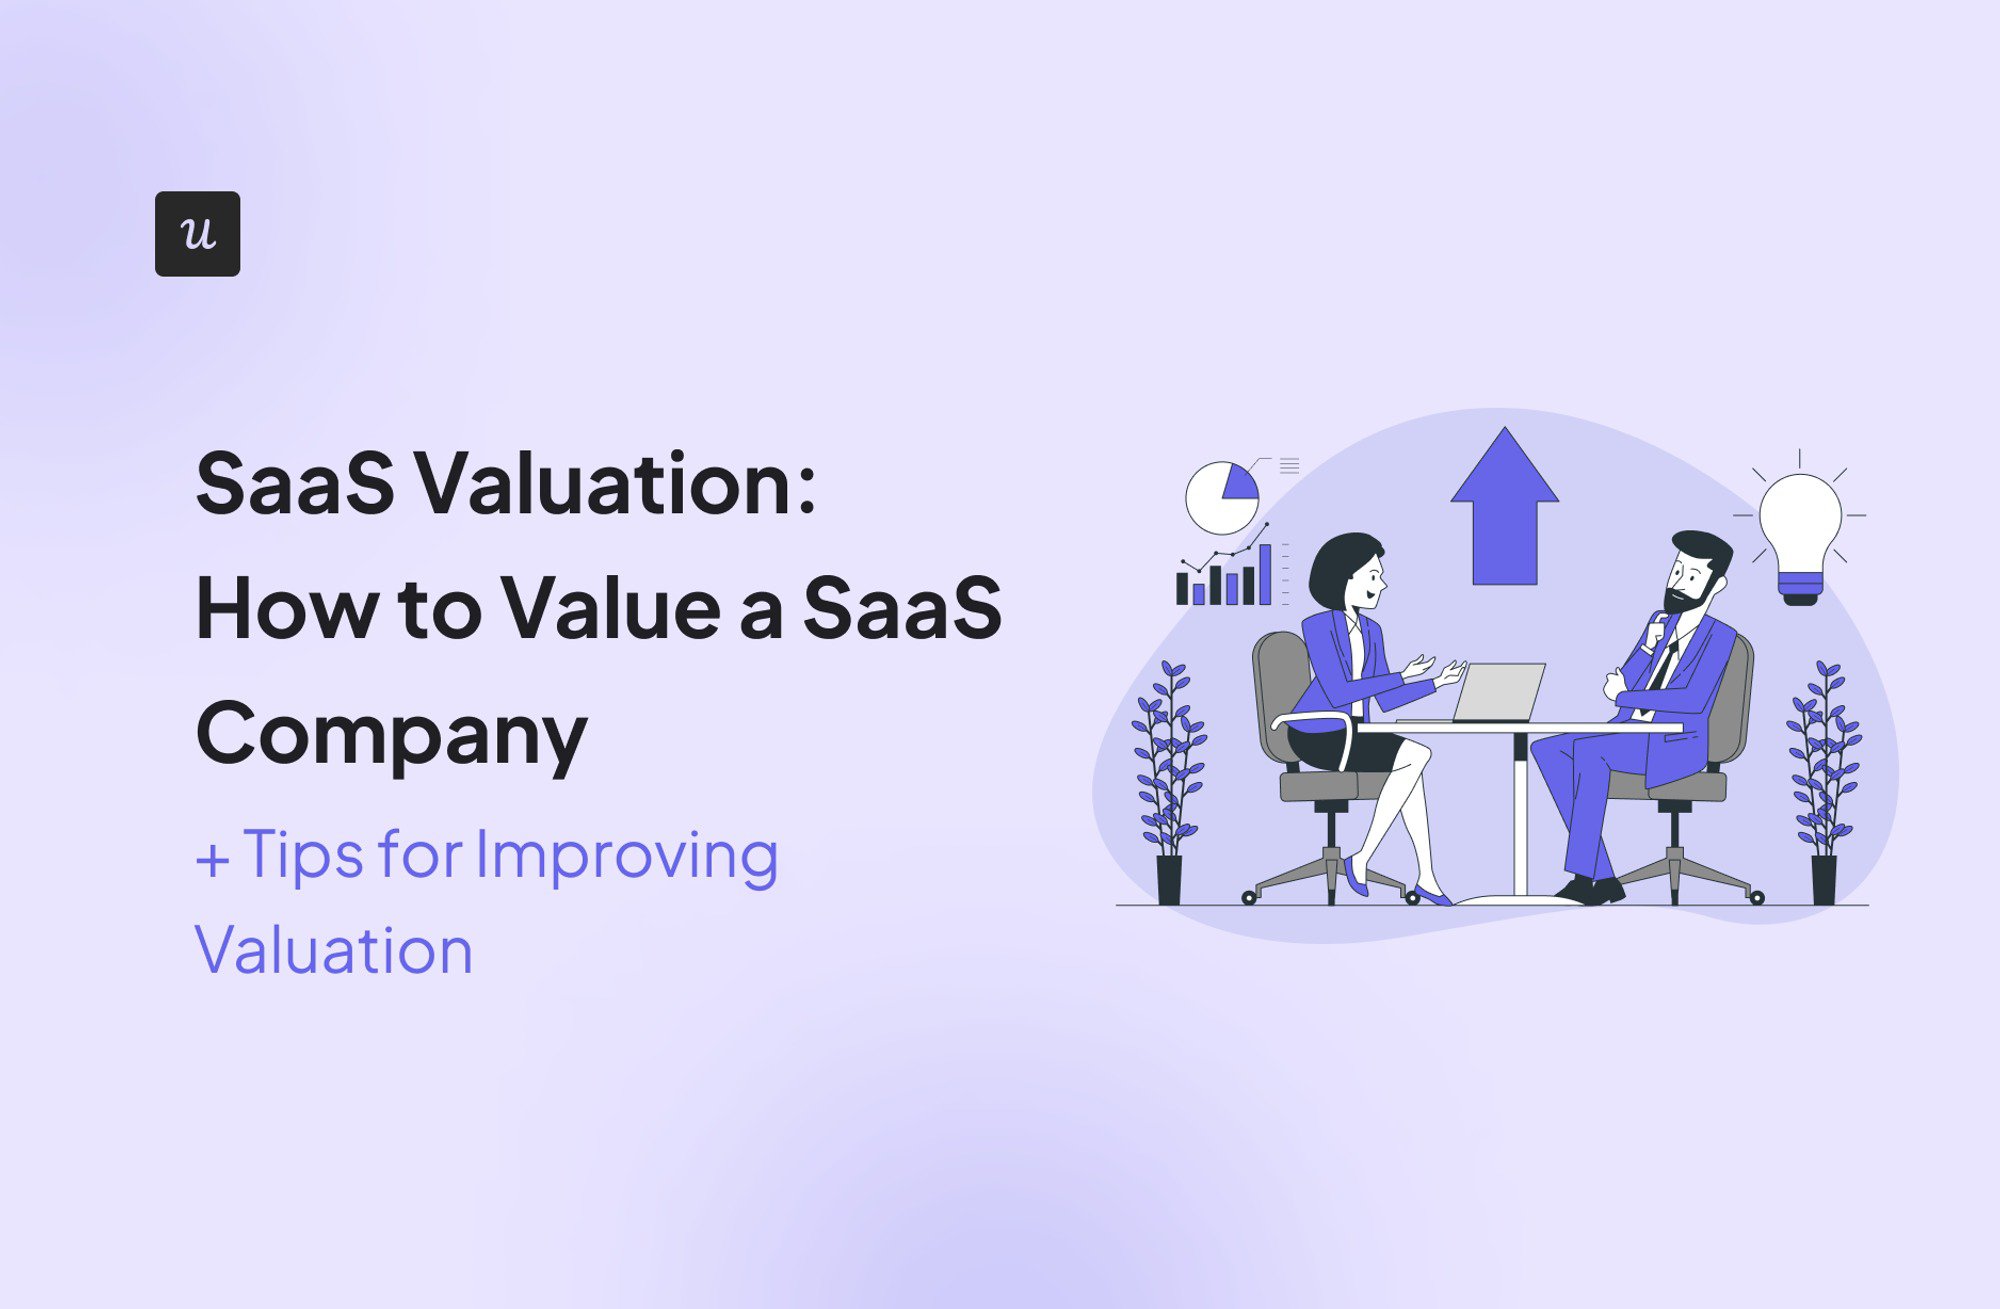 SaaS Valuation: How to Value a SaaS Company + Tips for Improving Valuation cover